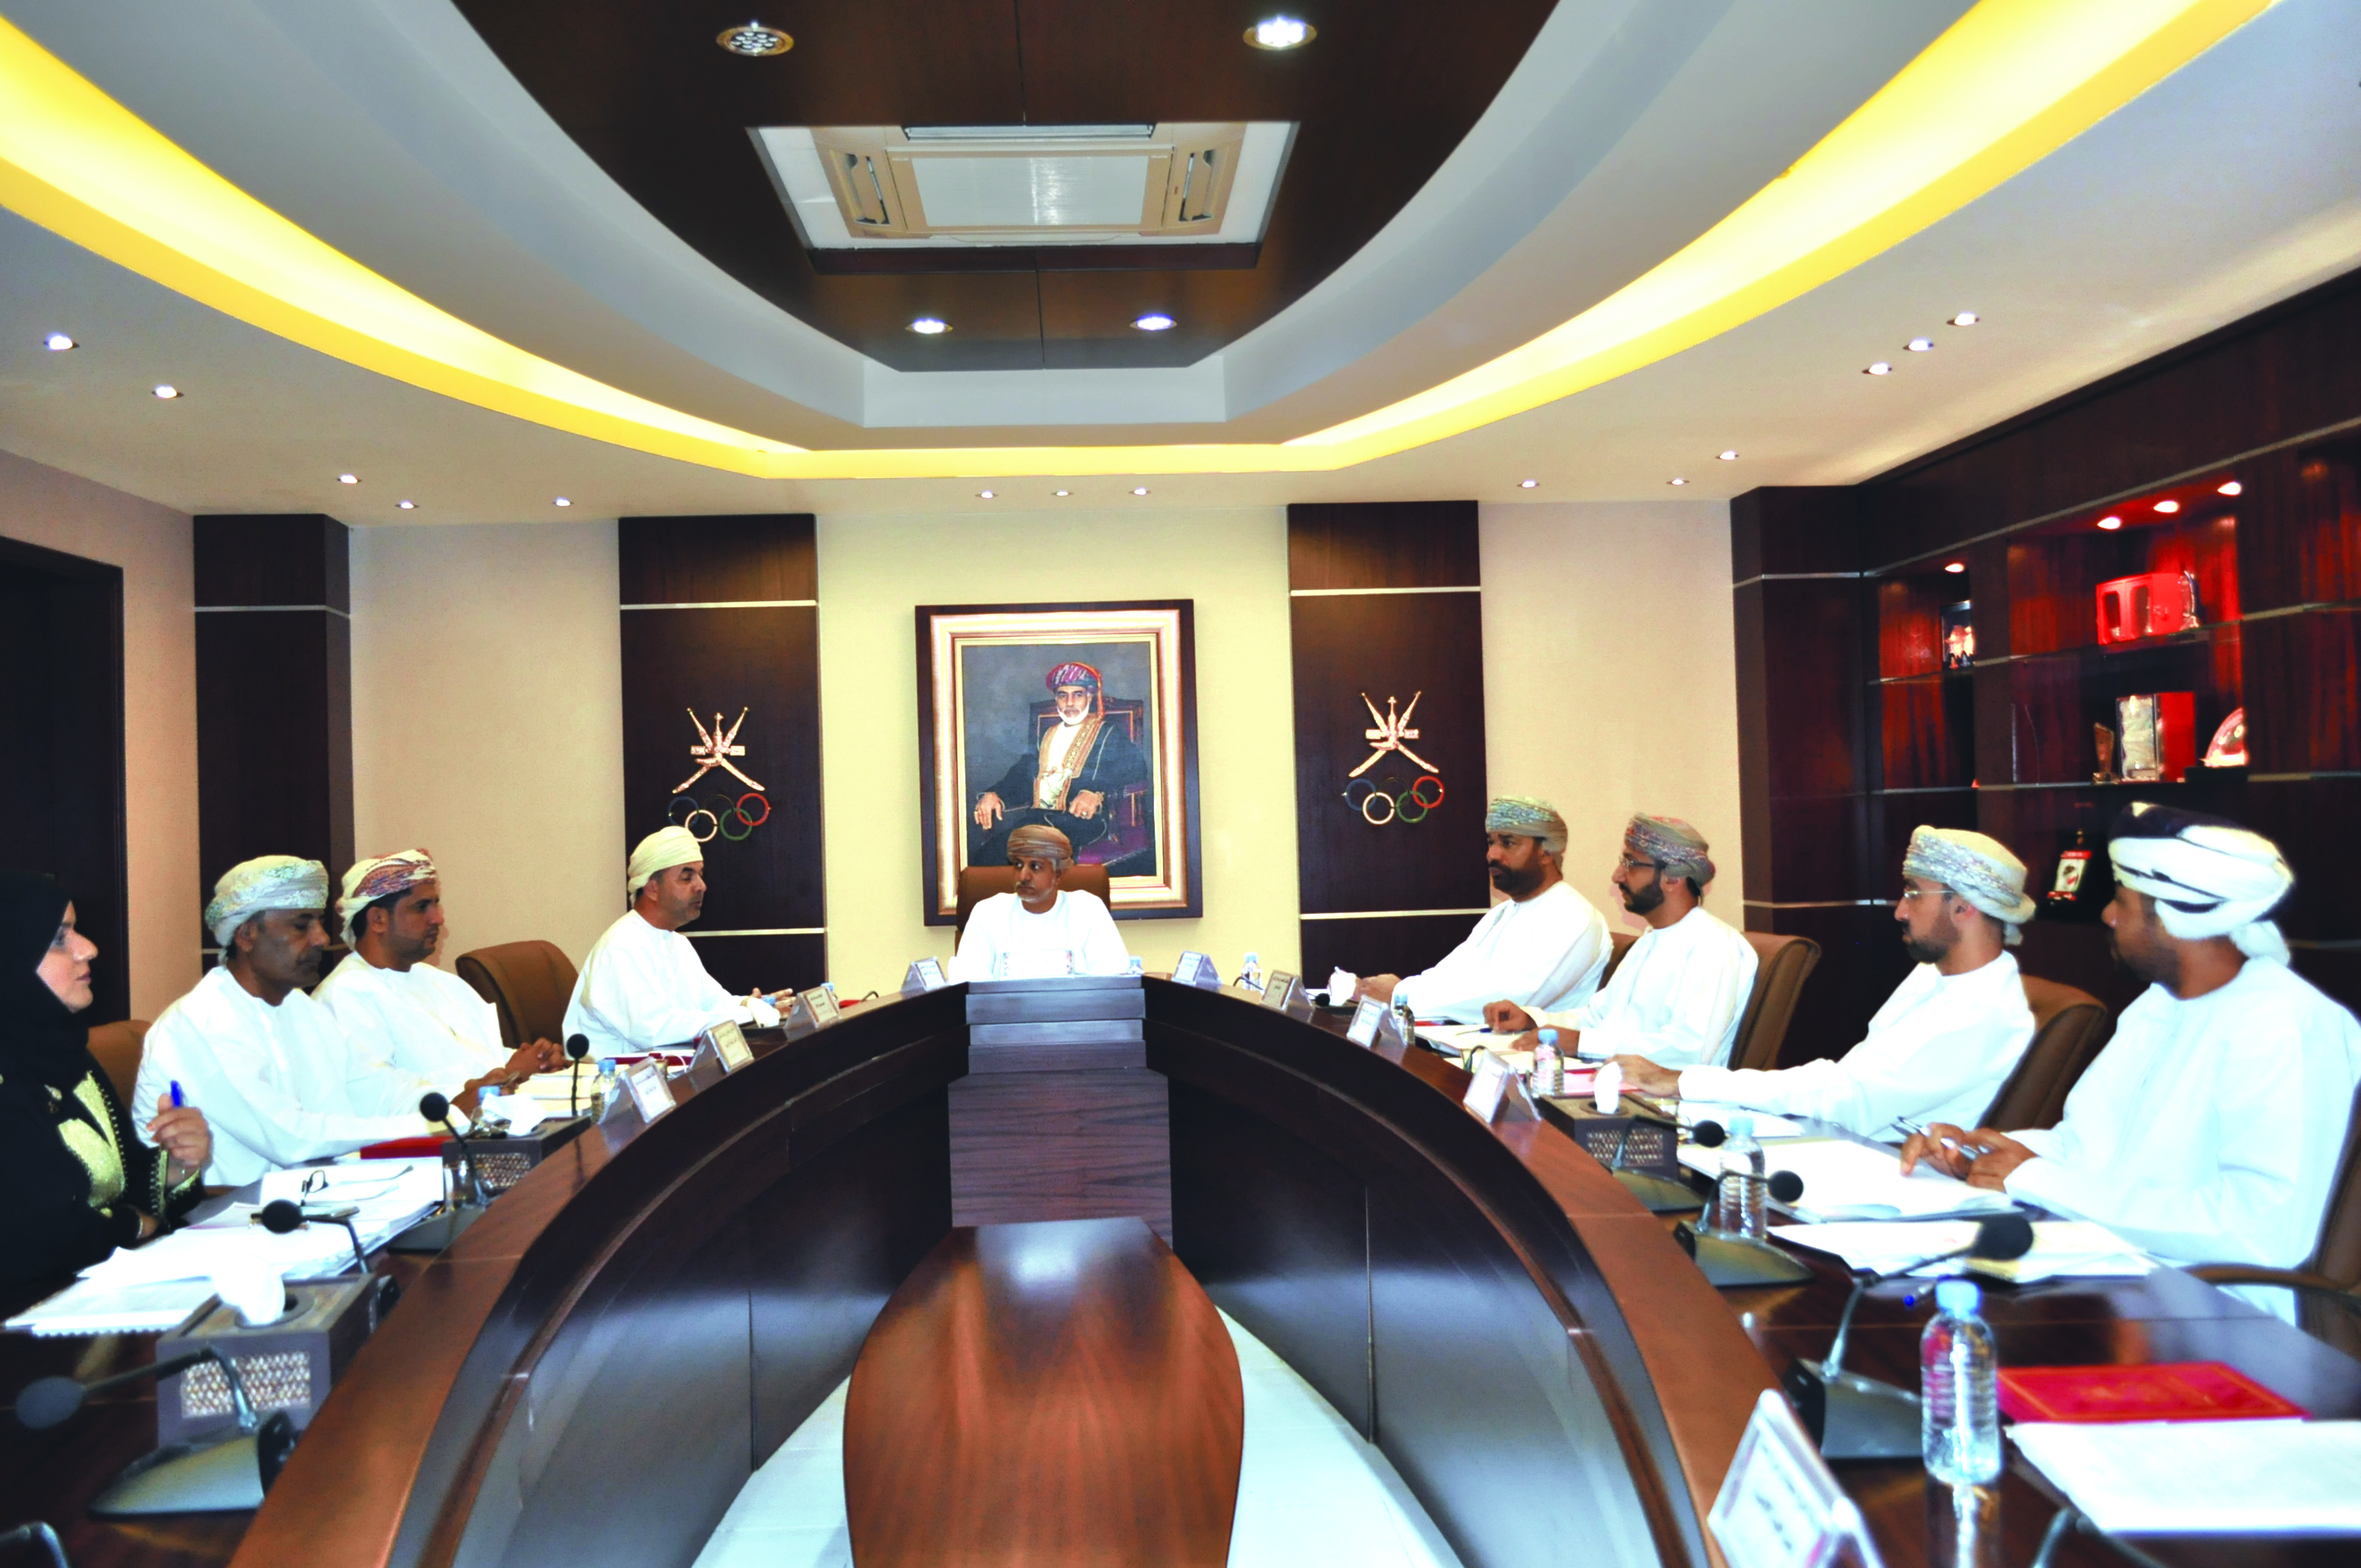 Oman Olympic Committee to host Extraordinary General Assembly in October